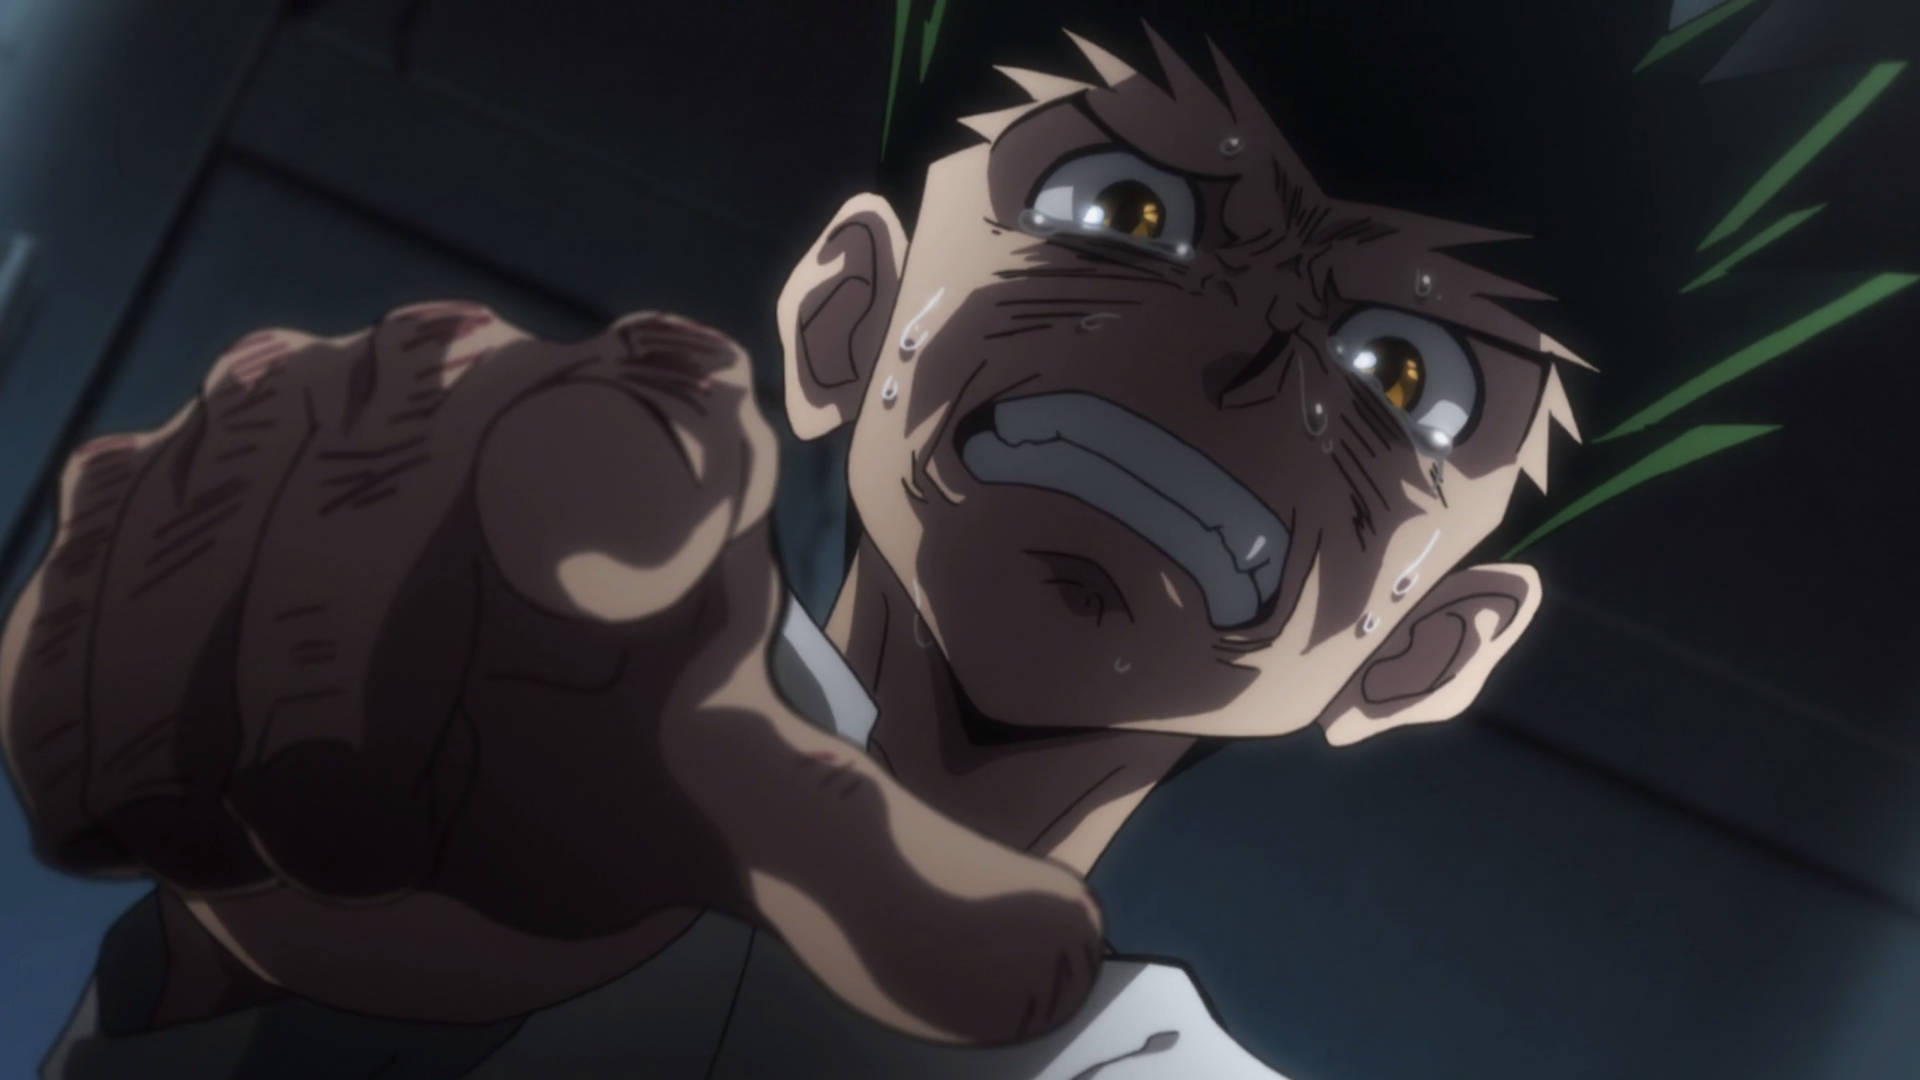 Crying Gon Freecss